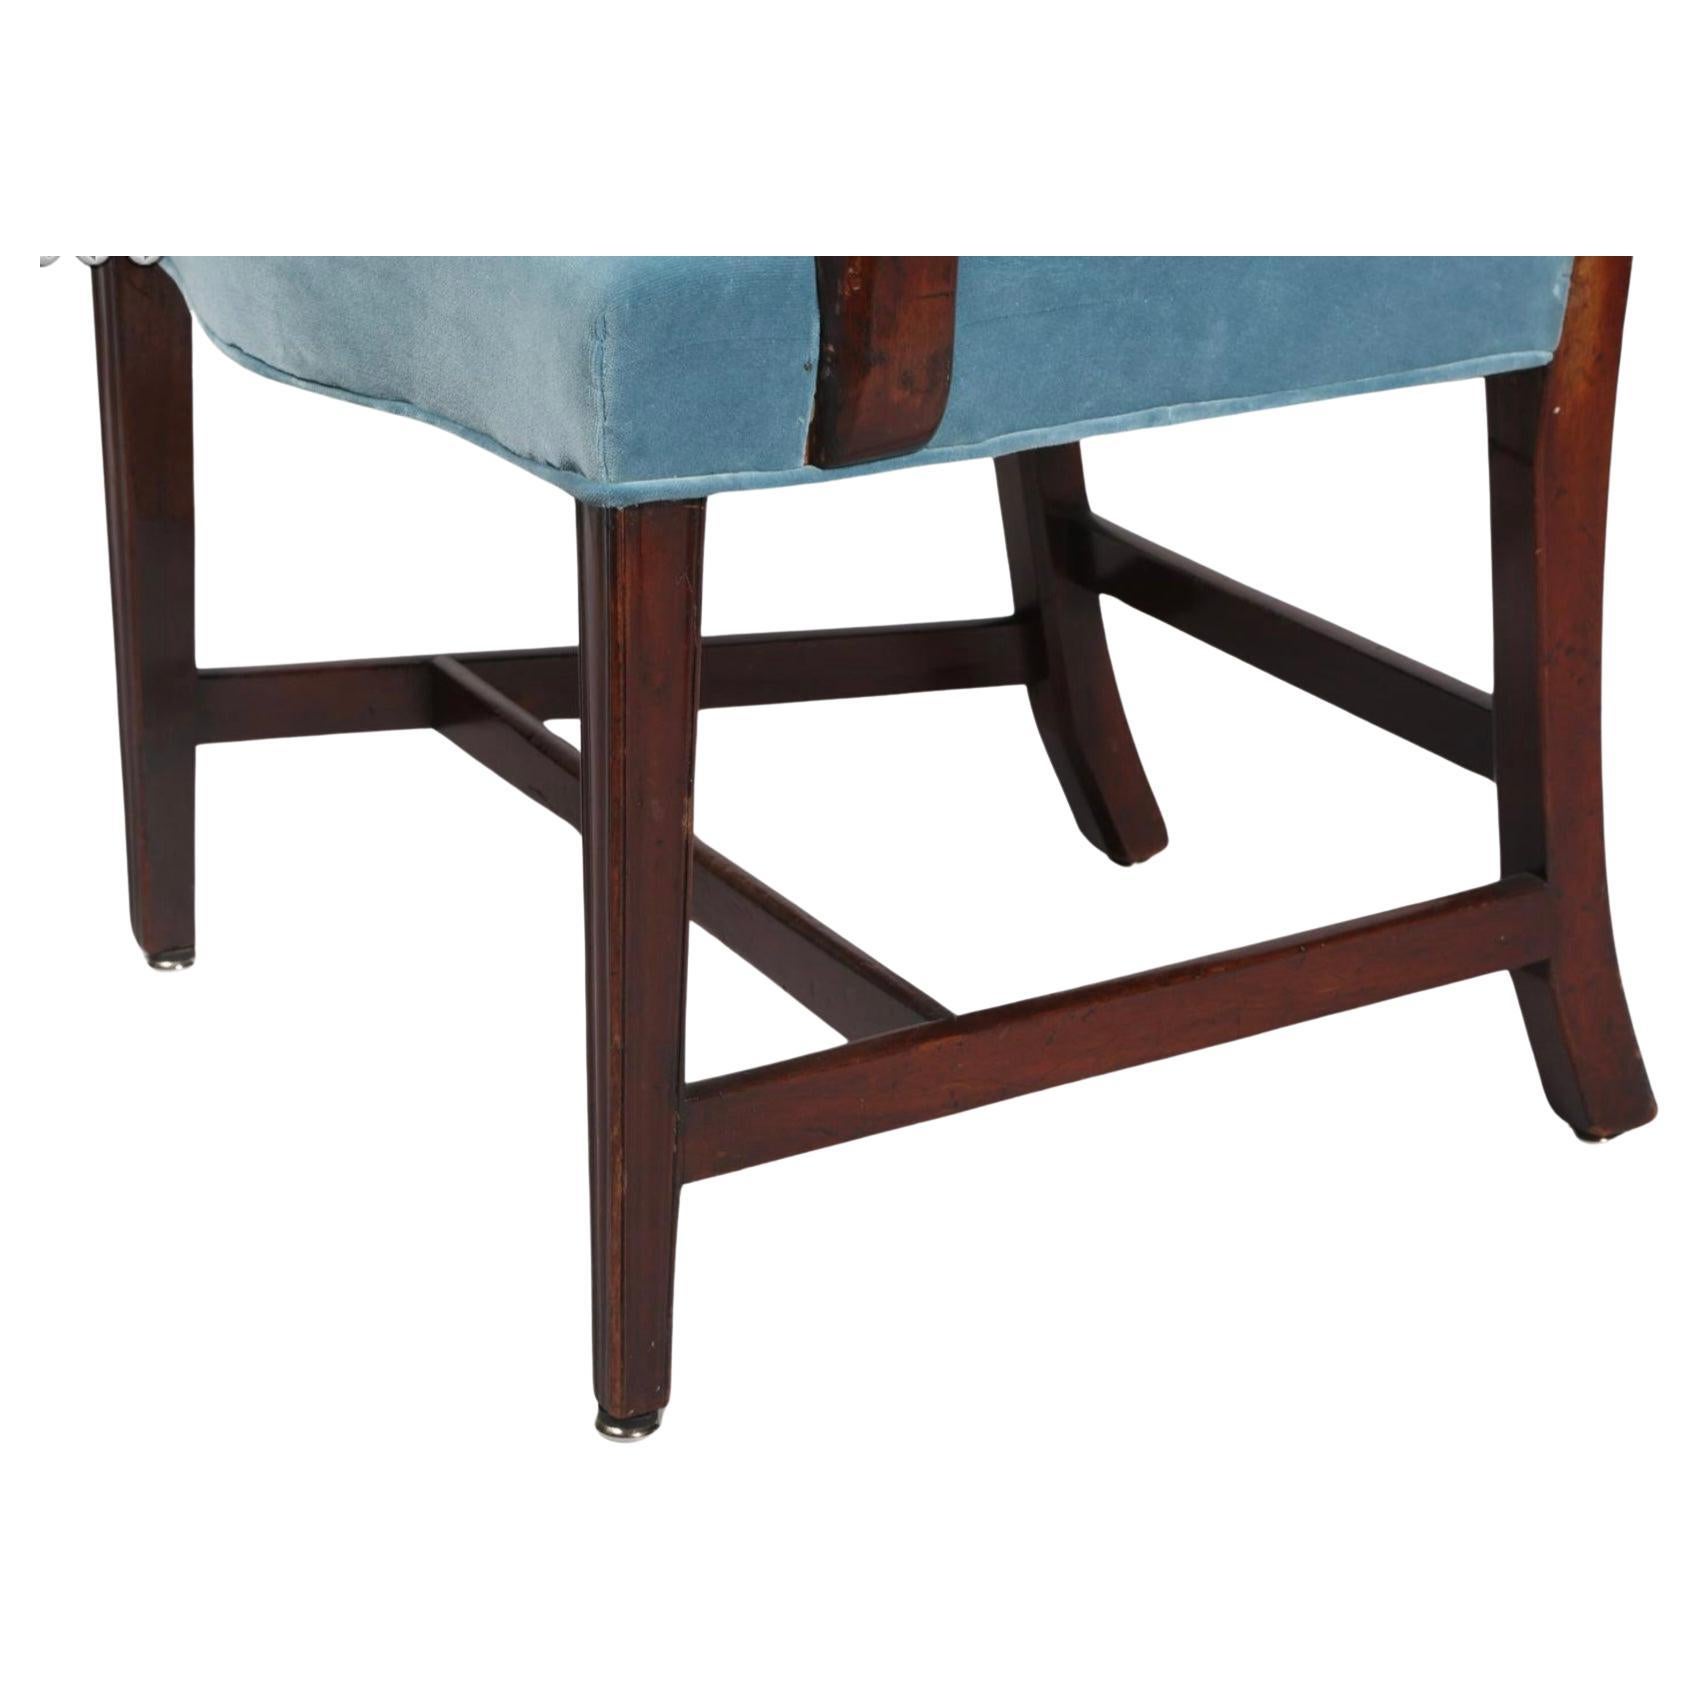 Set of Ten English Chippendale carved mahogany dining chairs with upholstered seats. Seats are upholstered in light blue. Chairs have carved and open splats, curved arms and H-stretchers as support. Set consists of 9 side chairs and one arm chair.